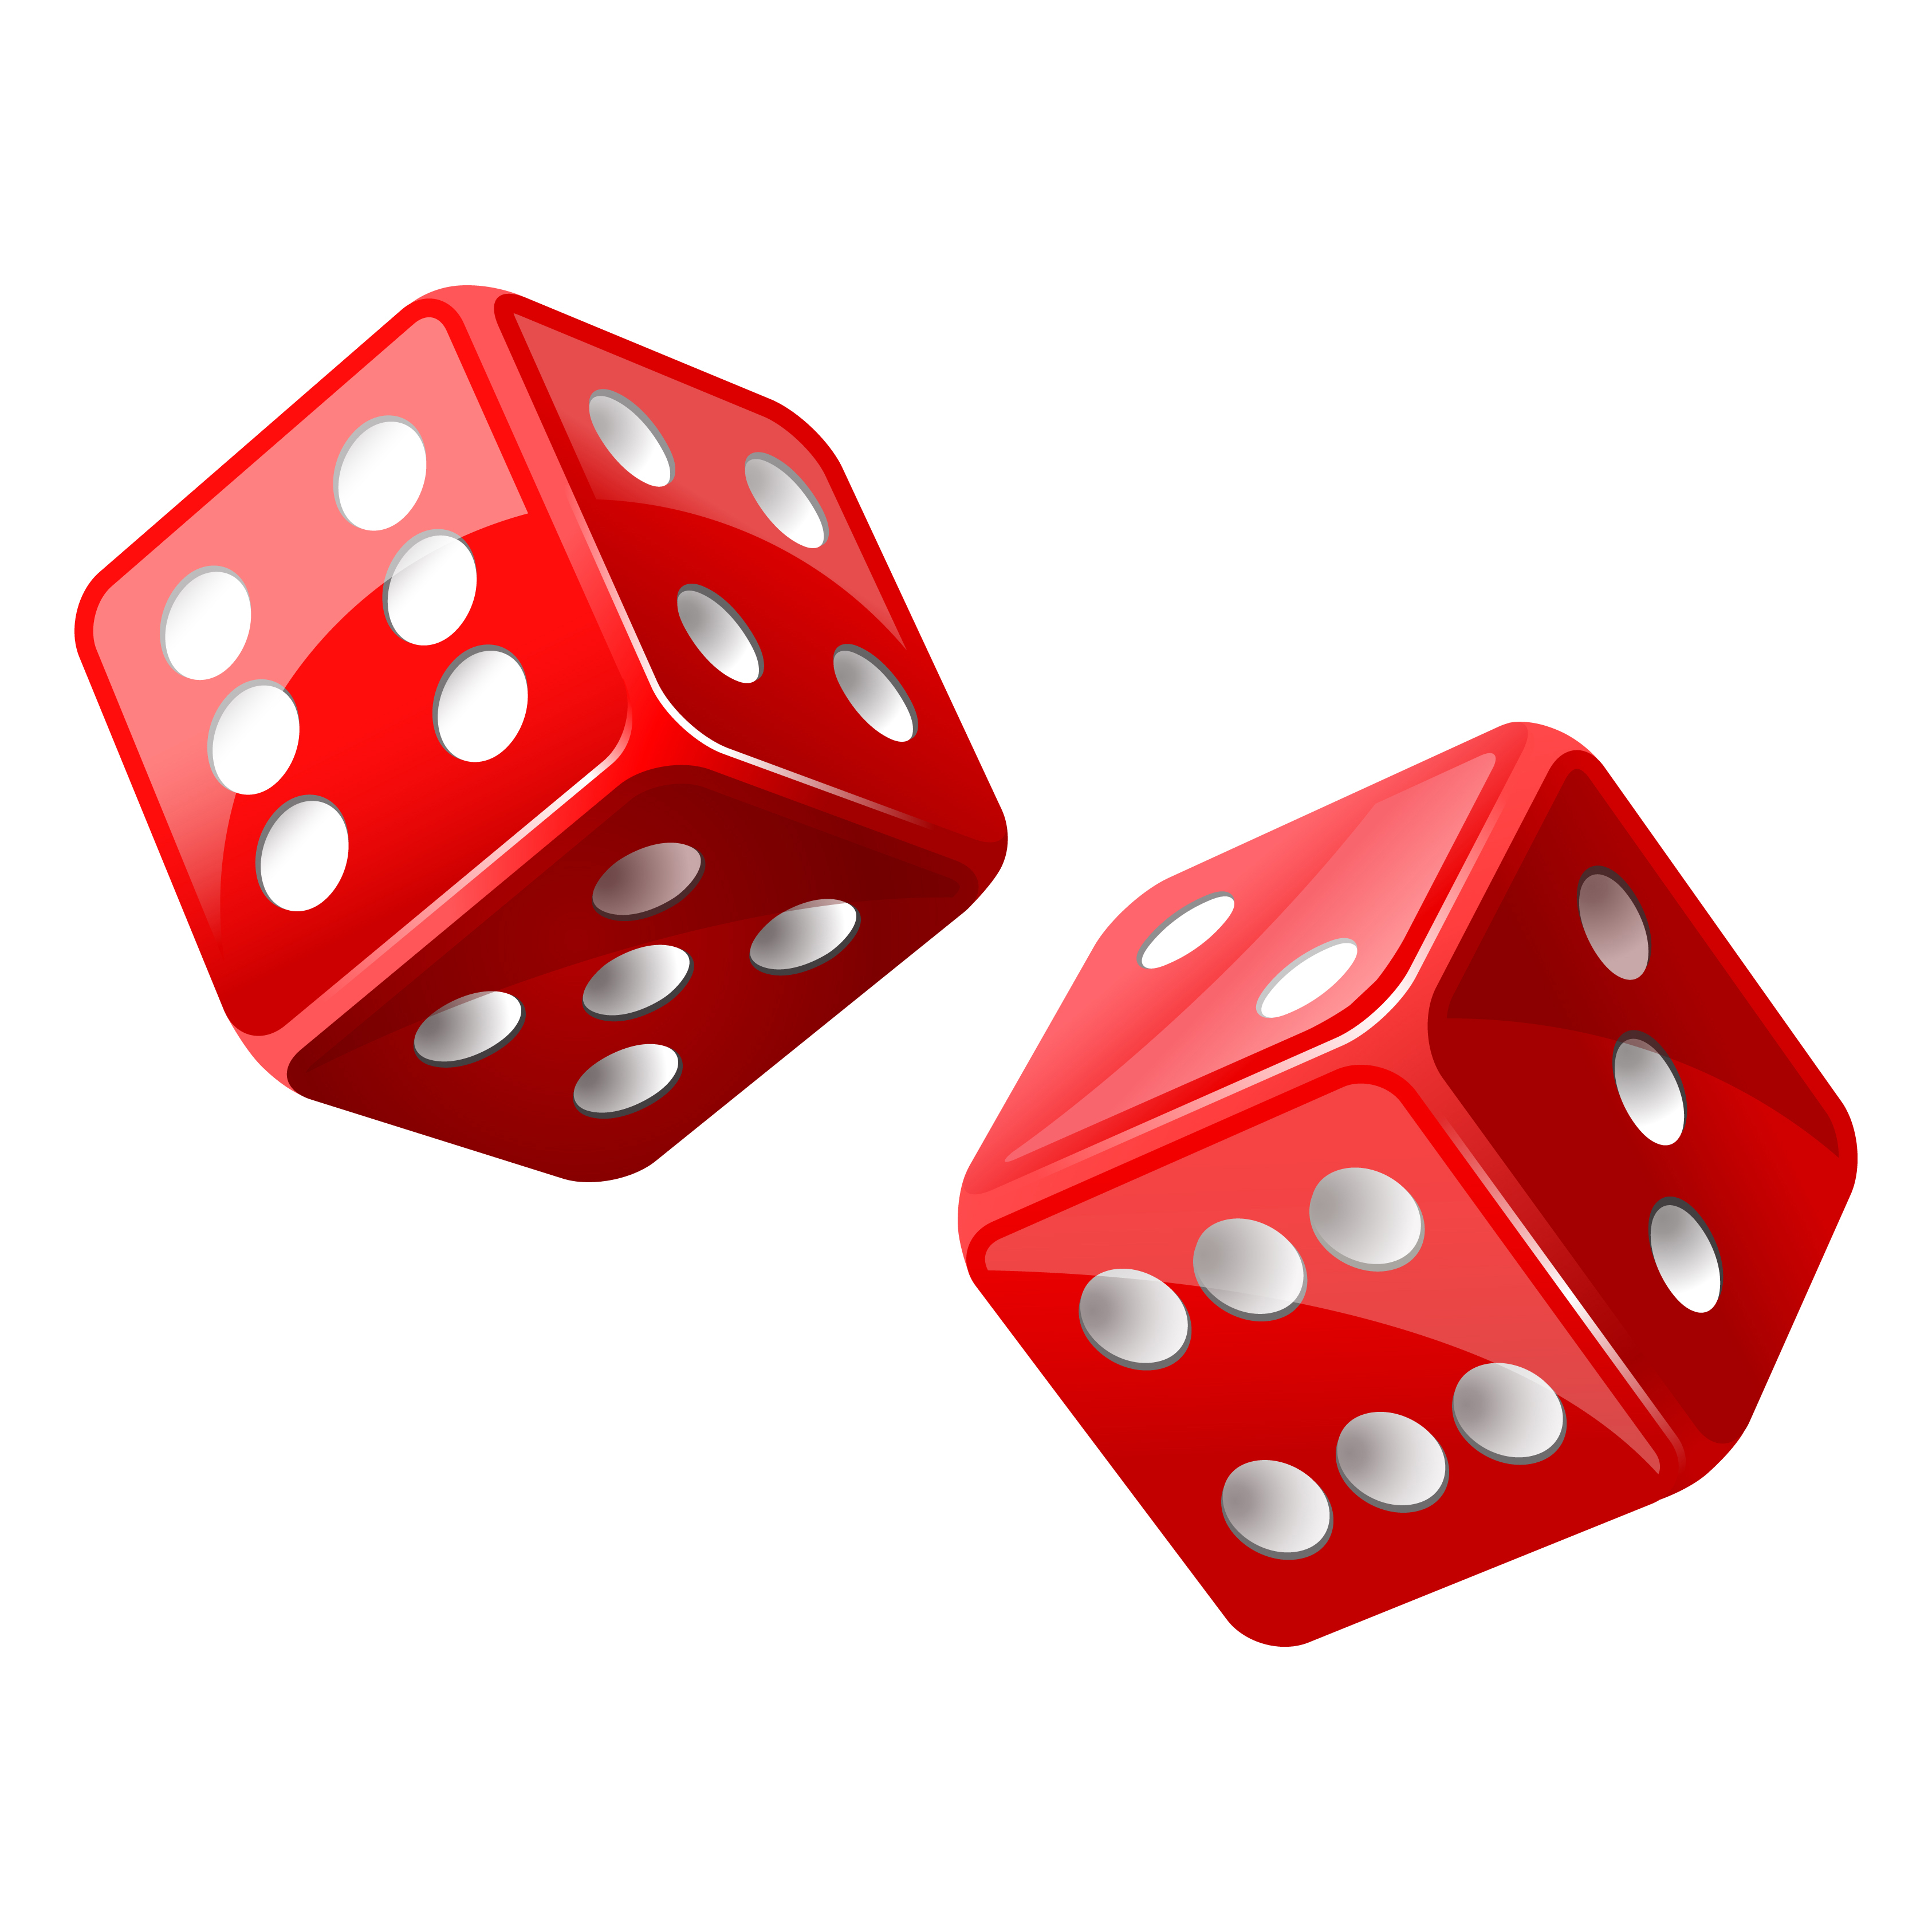 Red Dice Png - Clipart library